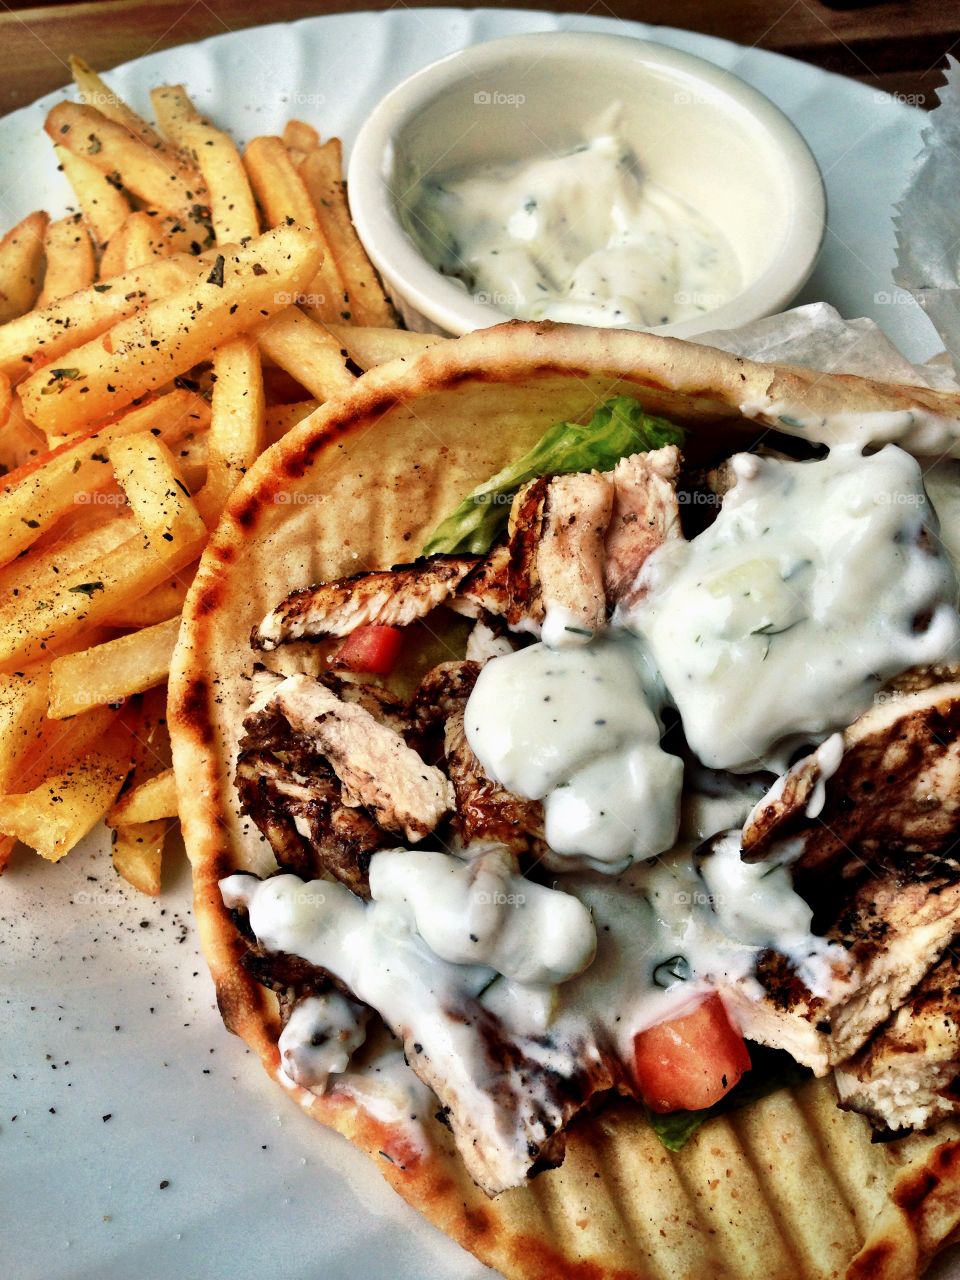 Fresh Chicken Gyro with seasoned fries. A Greek styled chicken gyro in pita bread with French fries and tzatziki sauce